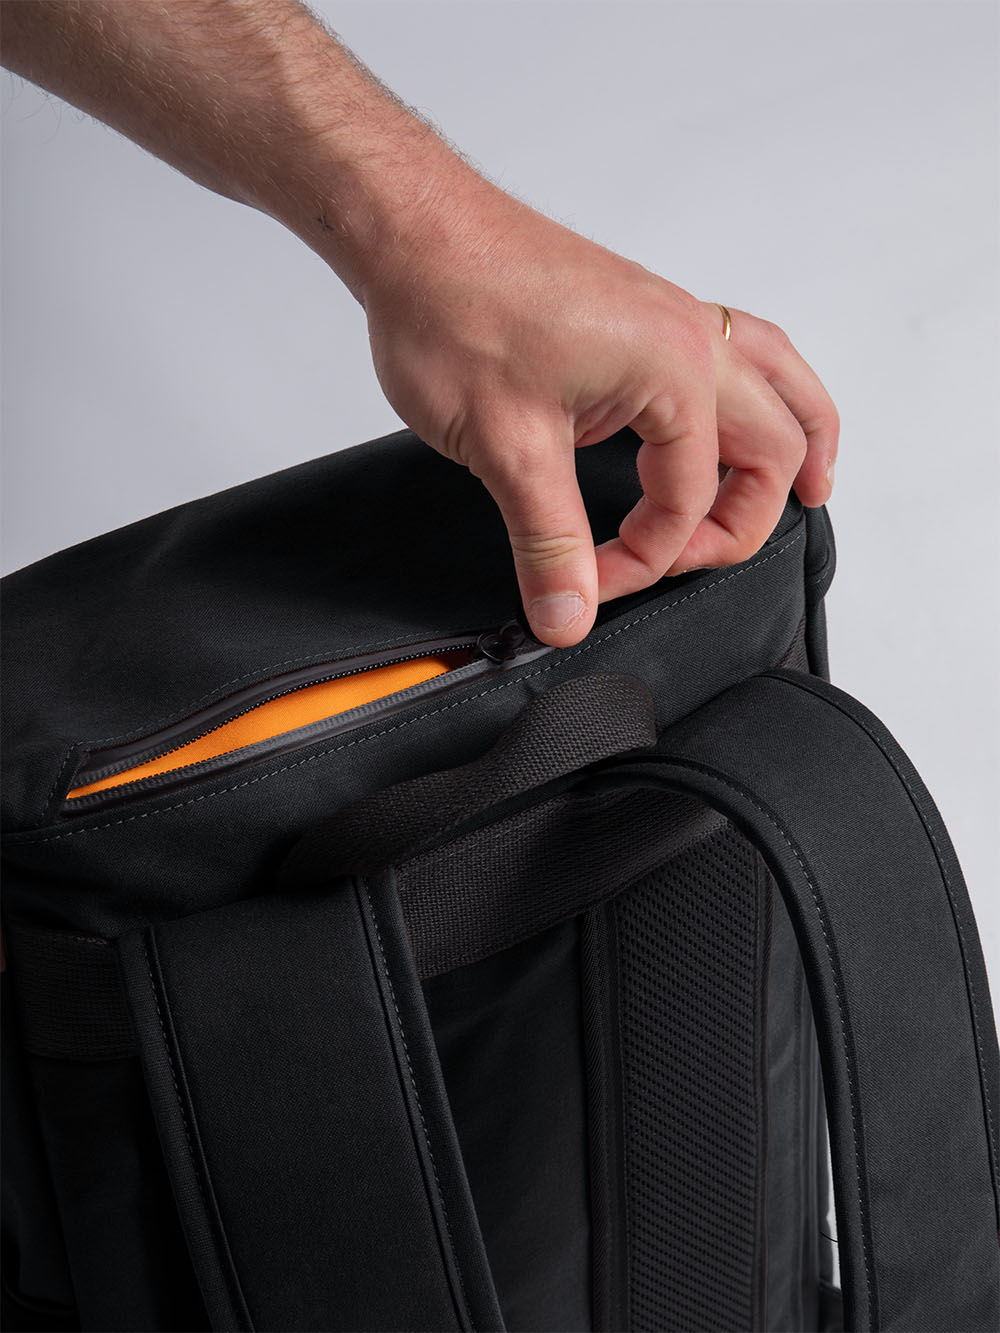 An image of a man unzipping the top quick access pocket on the Bannoch Pro - the backpack featured is in a black colour and the pocket internal colour is a bright orange. The zip is  located at the back of the backpack in the top pocket. Under nearth is the carry handle, straps and mesh back support.